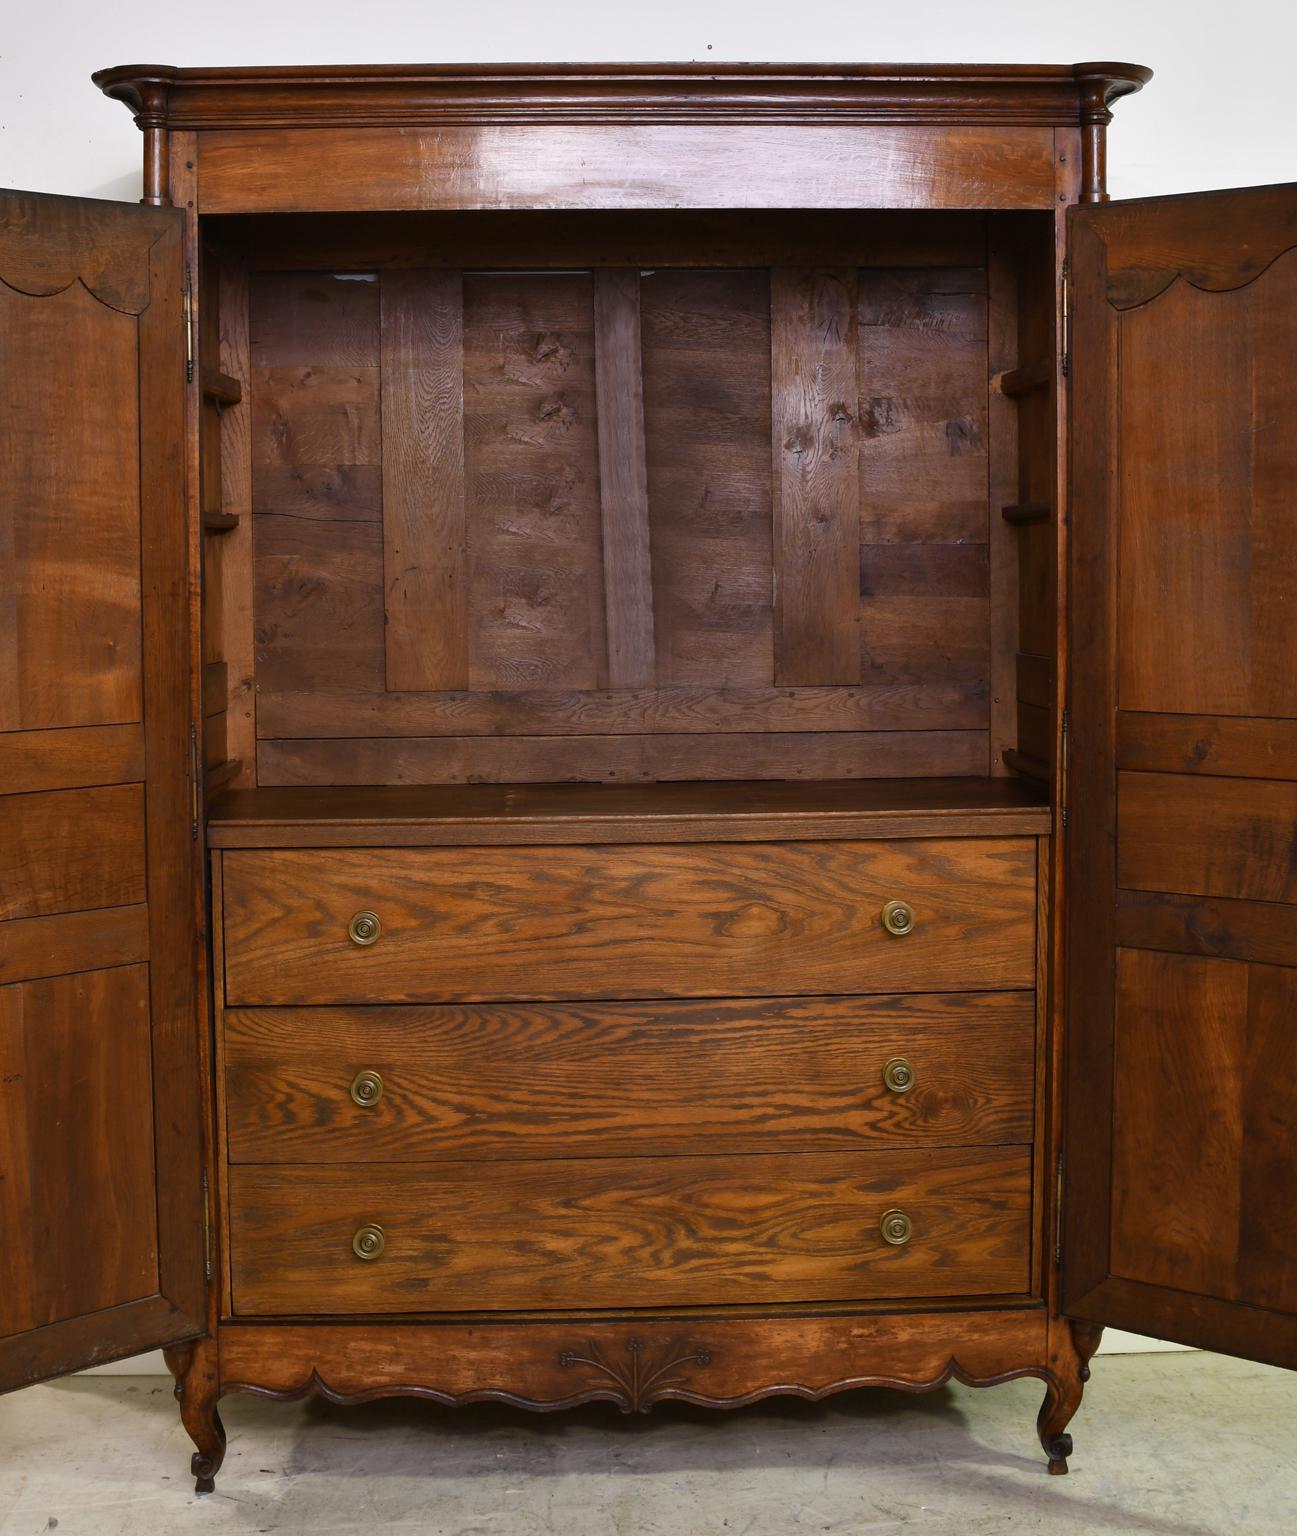 A French armoire, likely from the Empire period, in beautiful French oak with two doors opening to an interior offering three large storage drawers, also in oak, that were added in recent years to match the exterior. Armoire has turned columns with